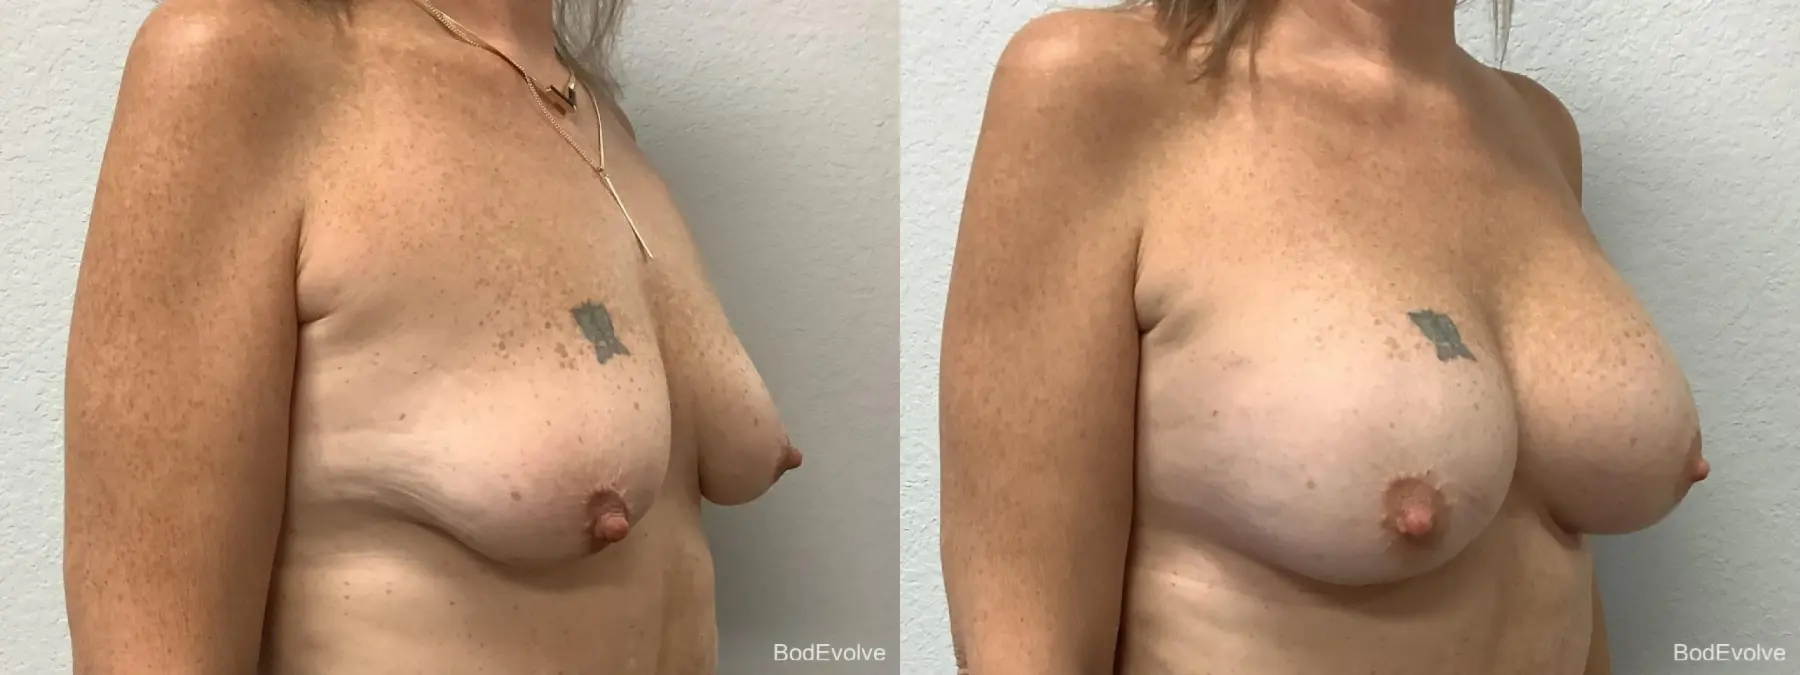 Breast Augmentation: Patient 9 - Before and After 4